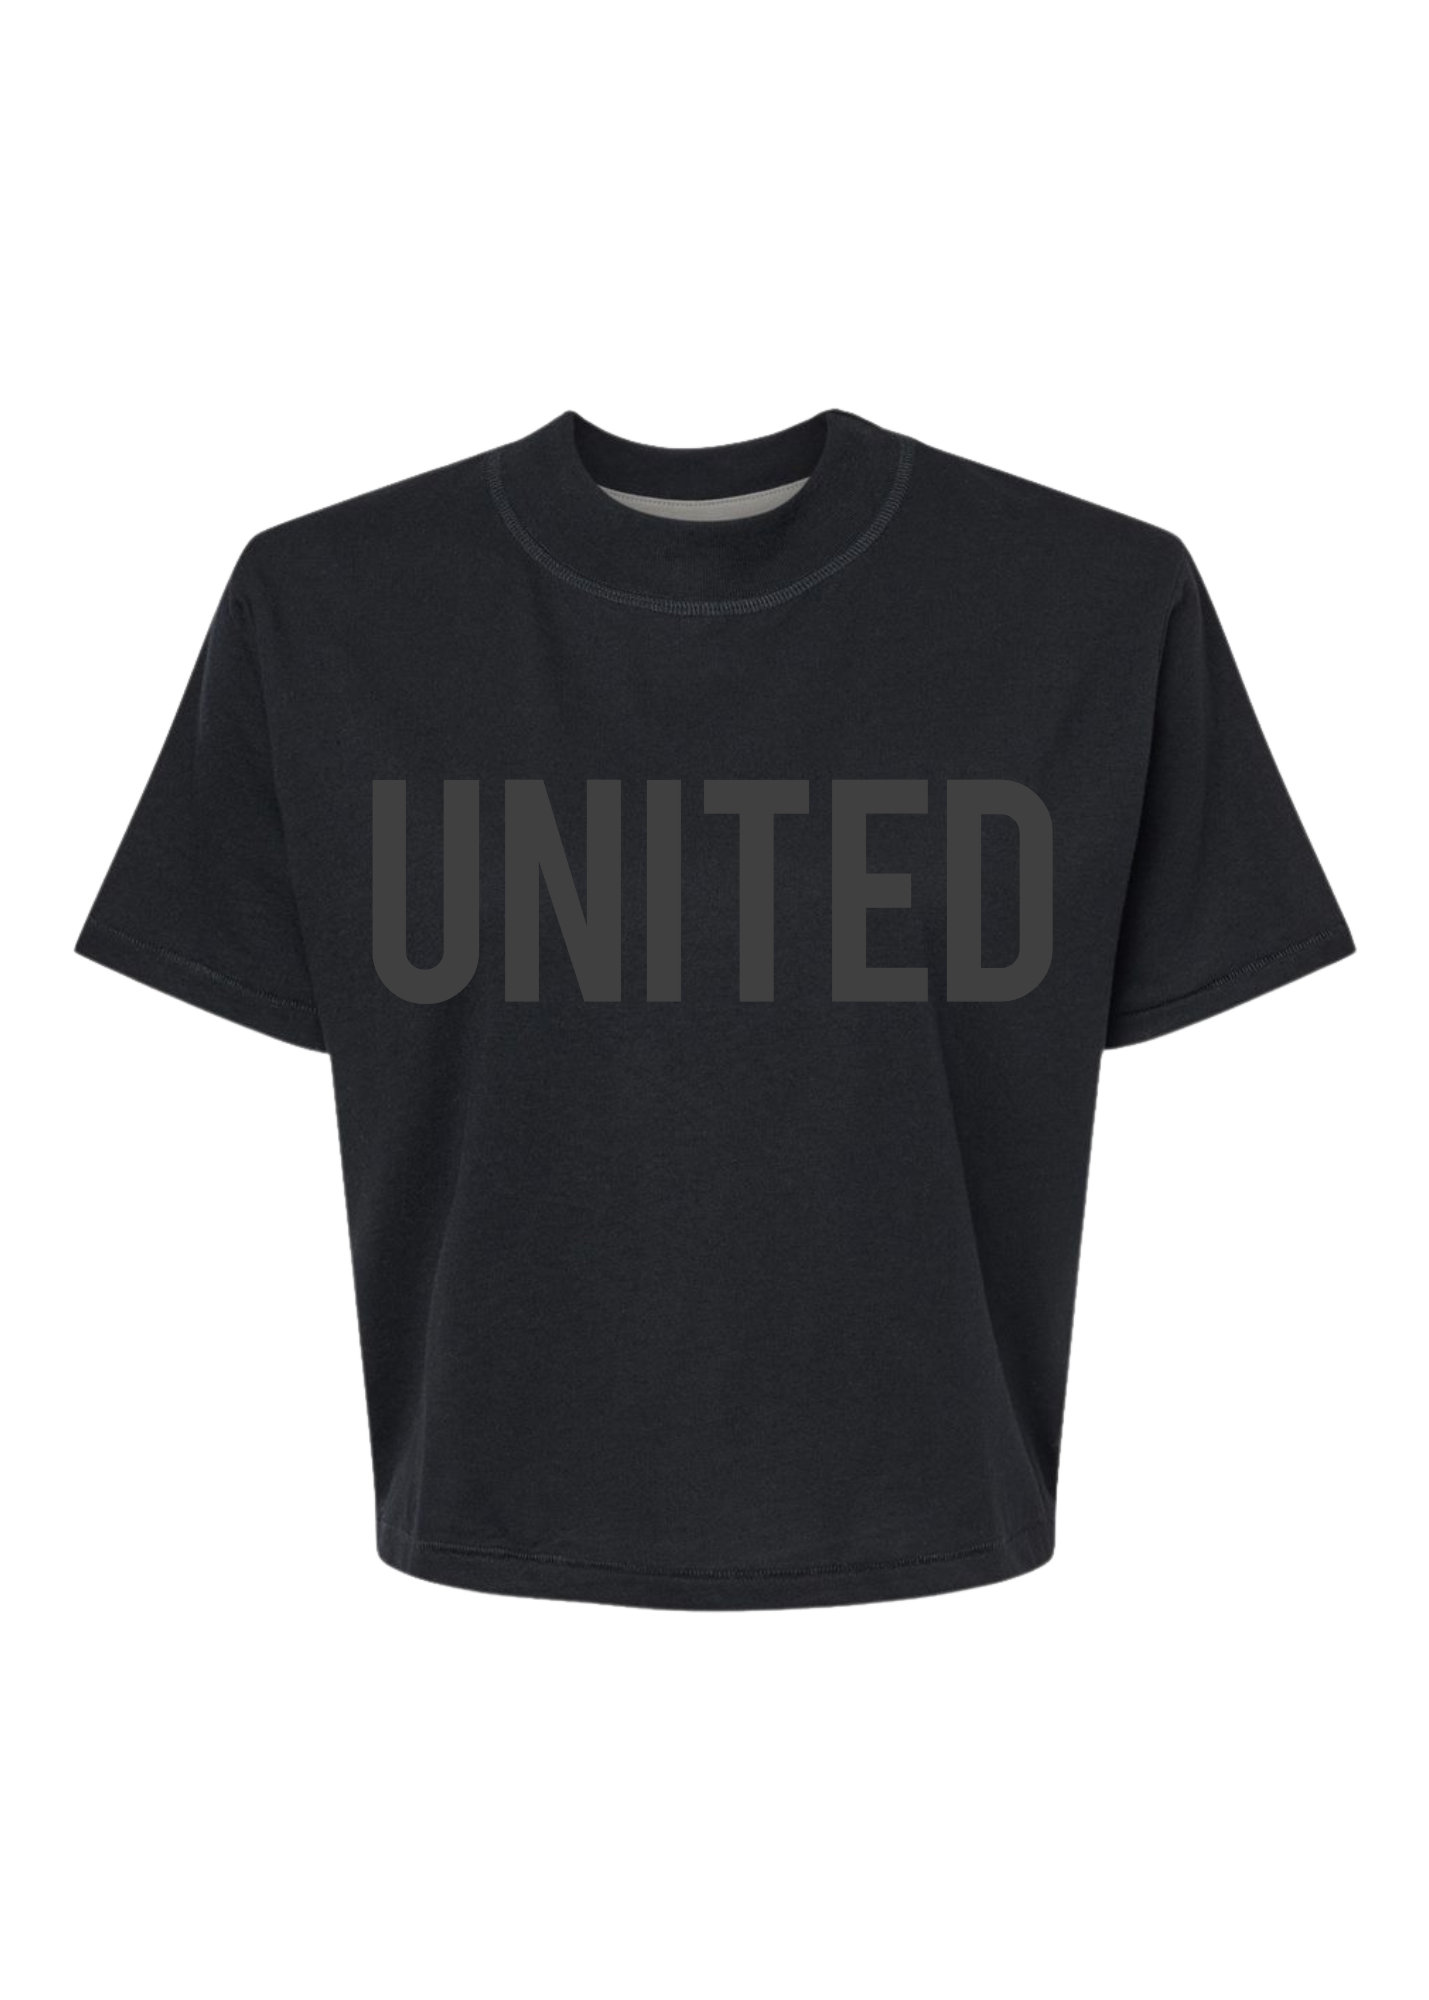 United Tonal | Mom Crop Tee-Sister Shirts-Sister Shirts, Cute & Custom Tees for Mama & Littles in Trussville, Alabama.